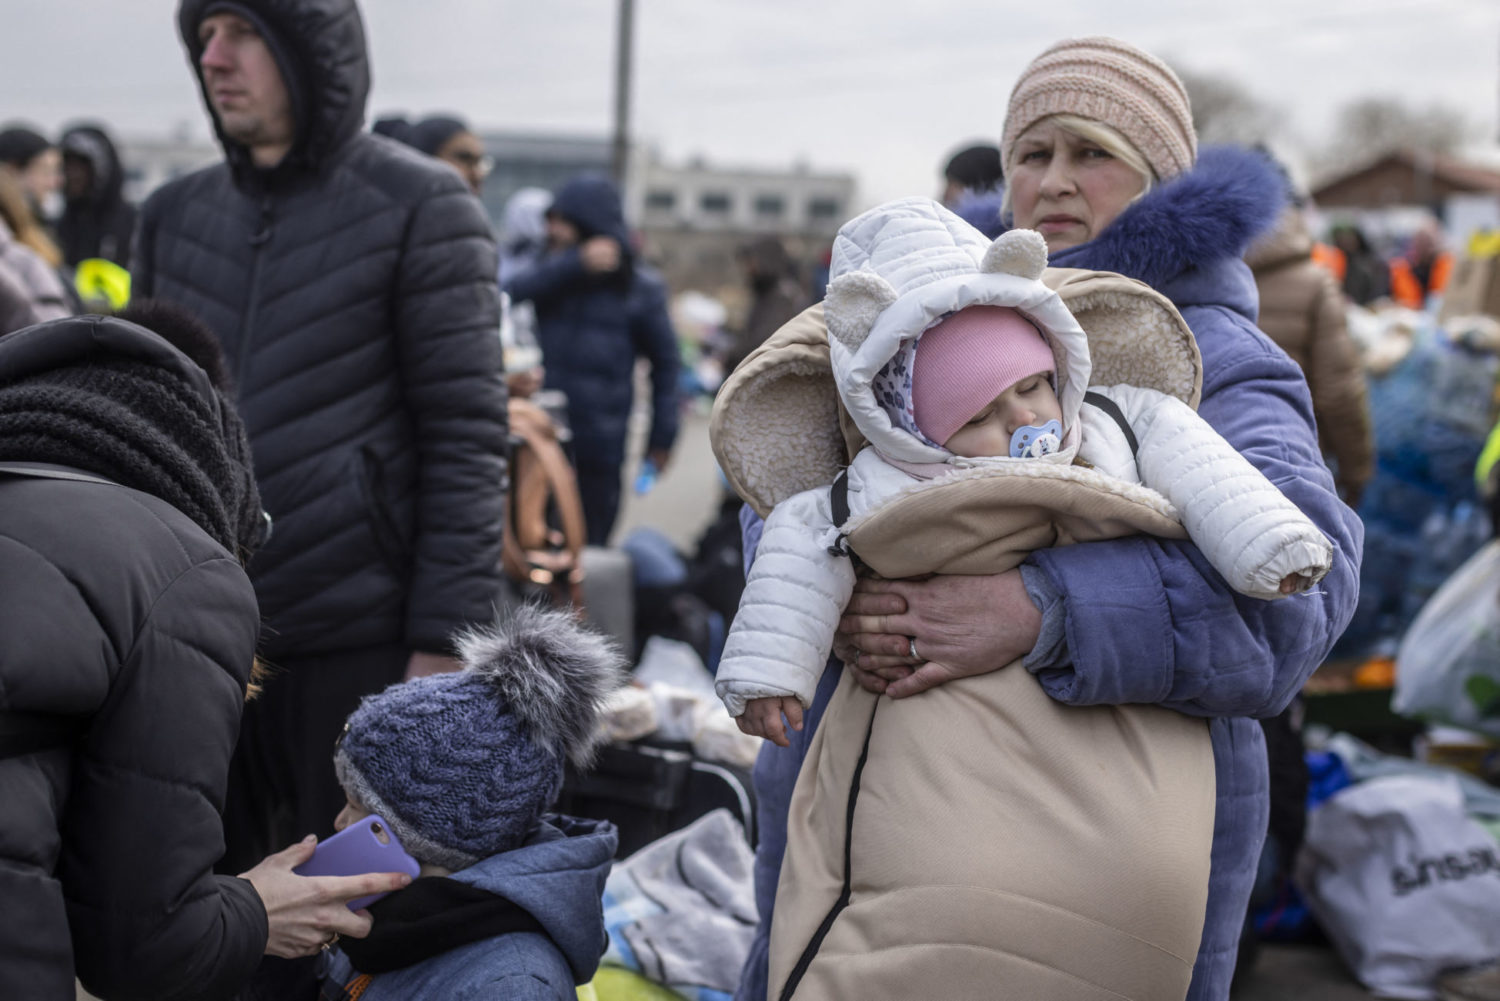 A woman holds a baby as Ukrainian citizens arrive at the Medyka pedestrian border crossing fleeing the conflict in Ukraine